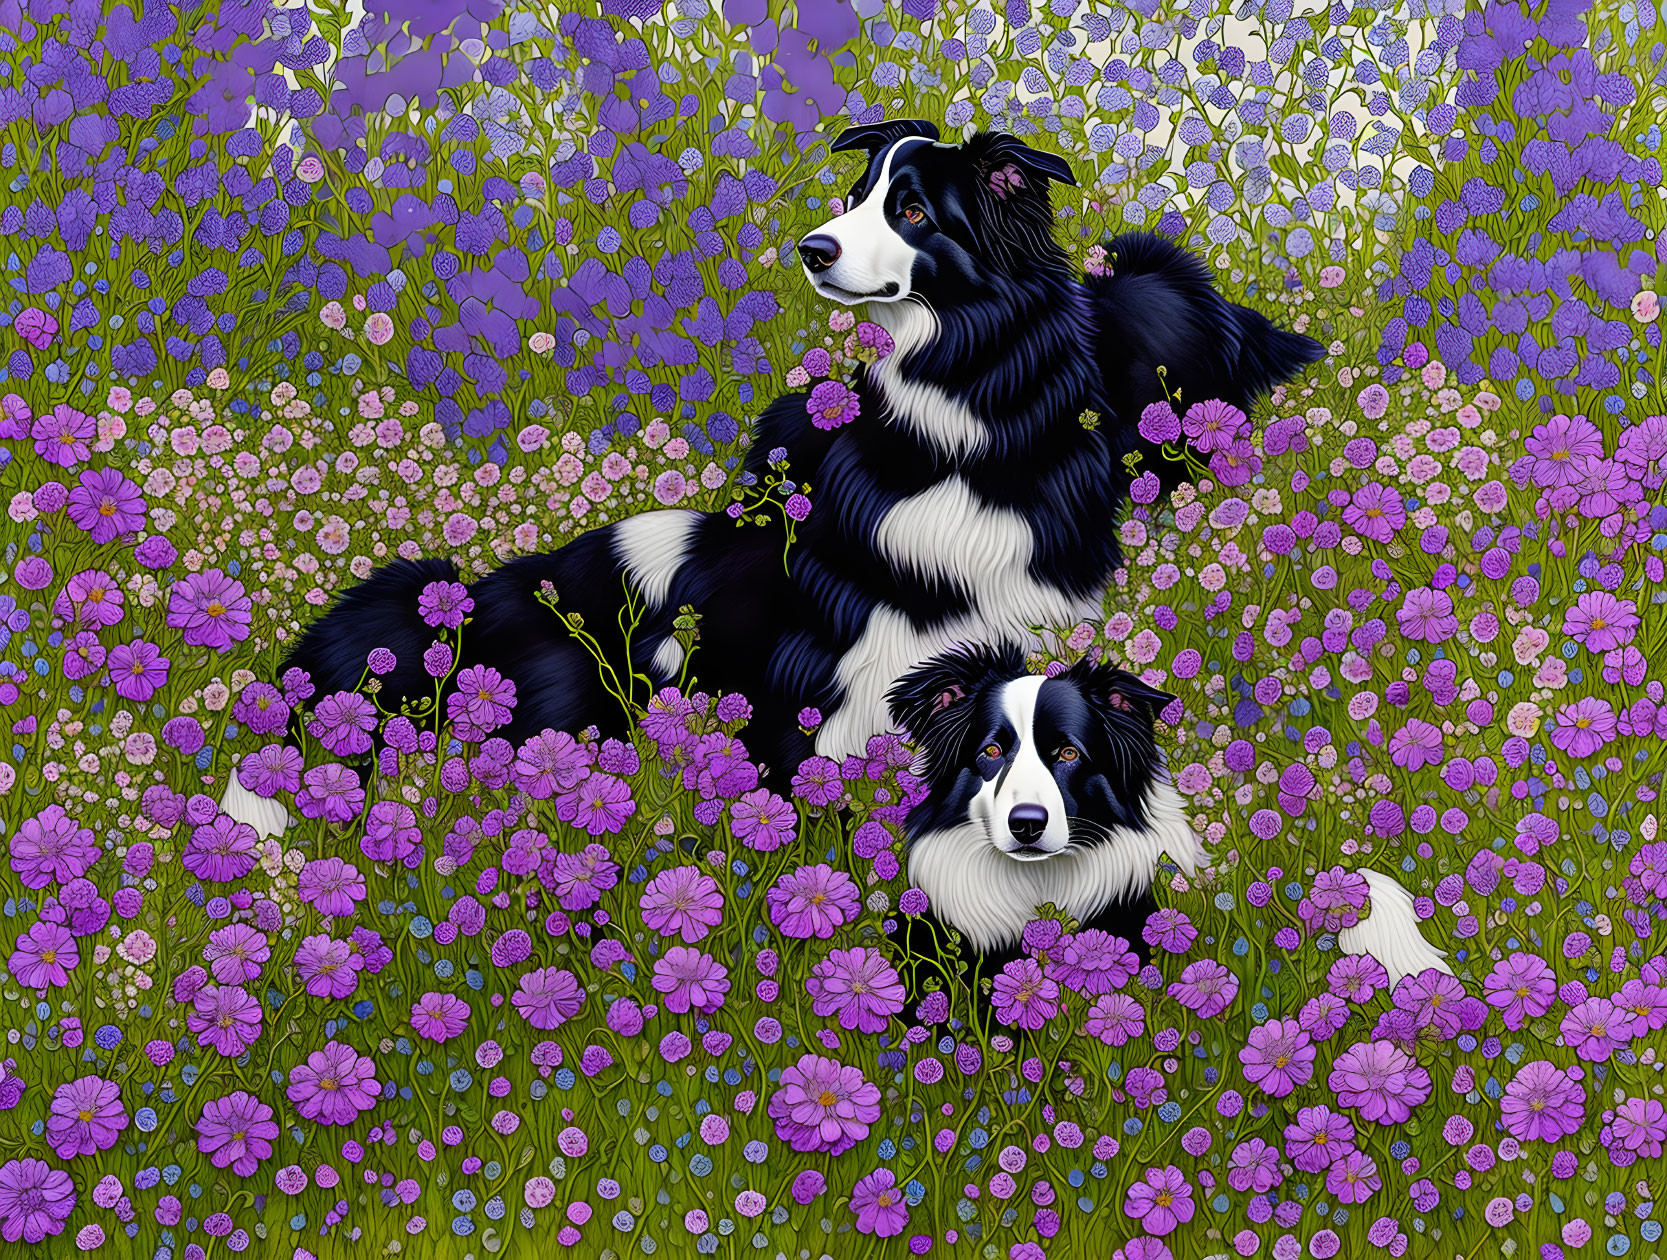 border collies in a field of purple flowers